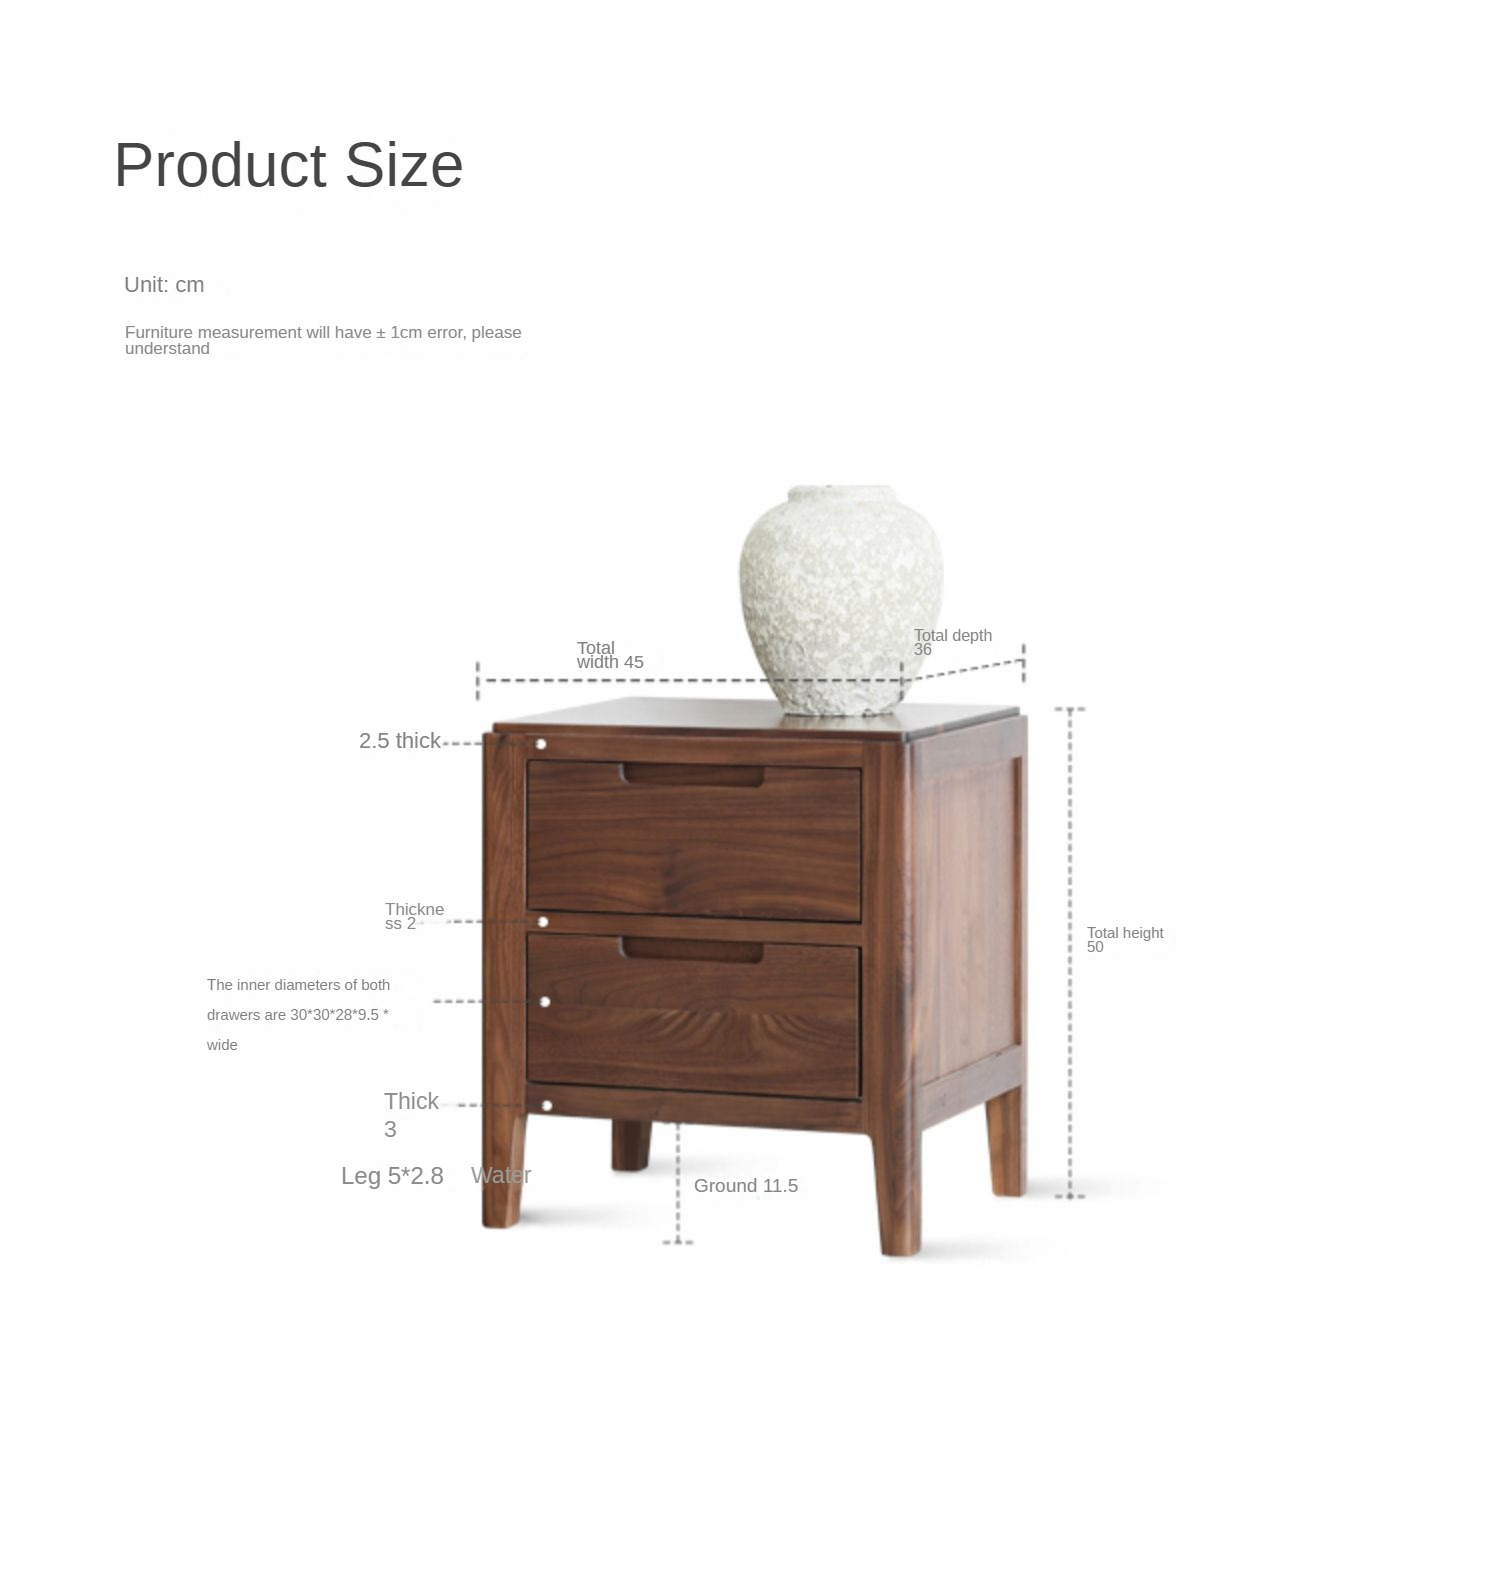 Black walnut solid wood two drawers nightstand"